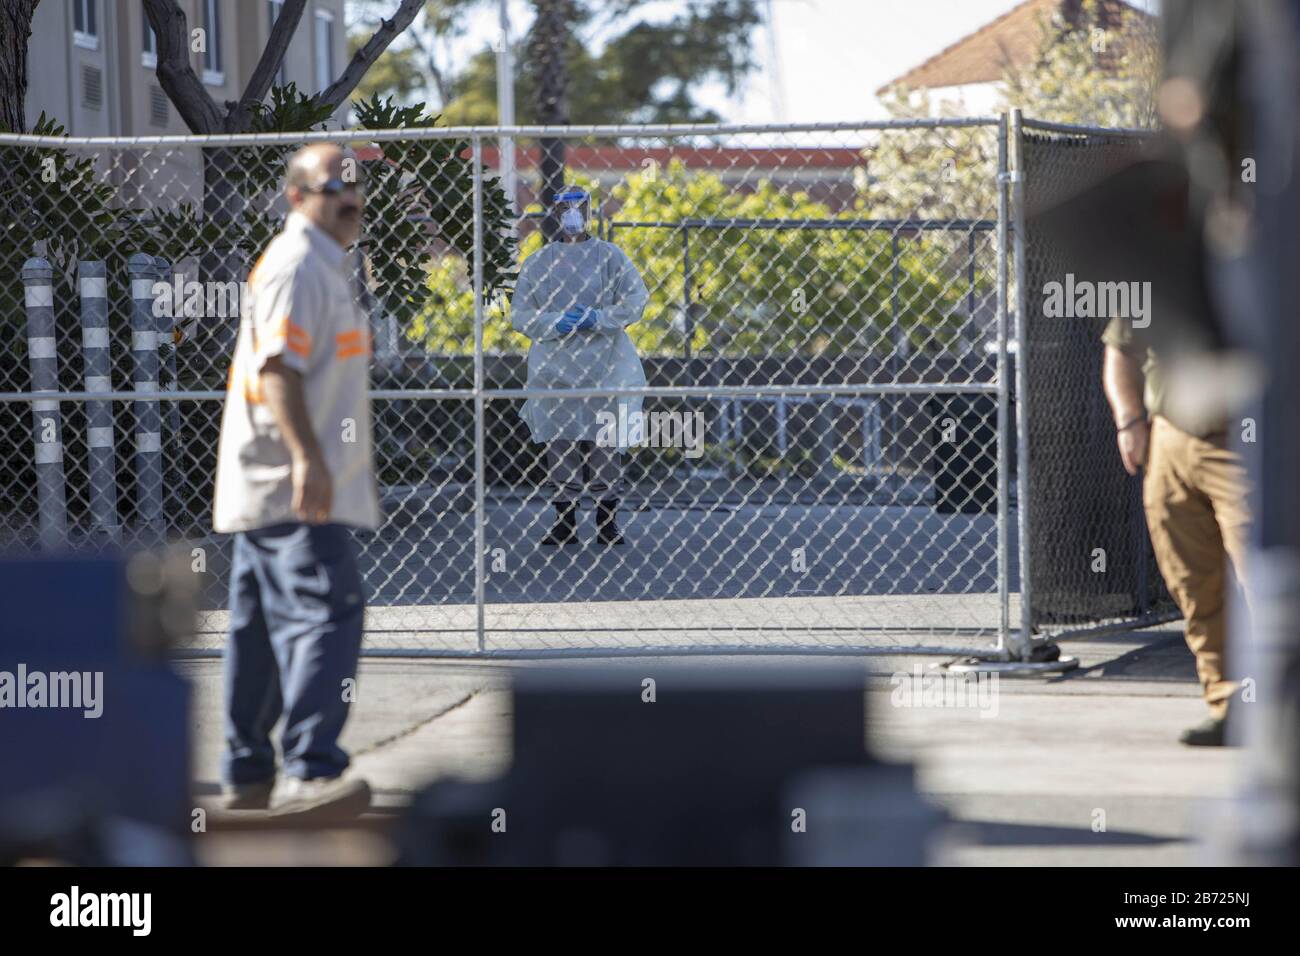 San Carlos, United States. 12th Mar, 2020. An unidentified health worker looks on from behind a chain linked fence surrounding the Fairfield Inn, a hotel purchased by the State of California to be used as a quarantine facility for CCOVID-19 patients, as a delivery driver gets directions from a US Marshal that is guarding the facility in San Carlos, California on Thursday, March 12, 2020. Photo by Peter DaSilva/UPI Credit: UPI/Alamy Live News Stock Photo